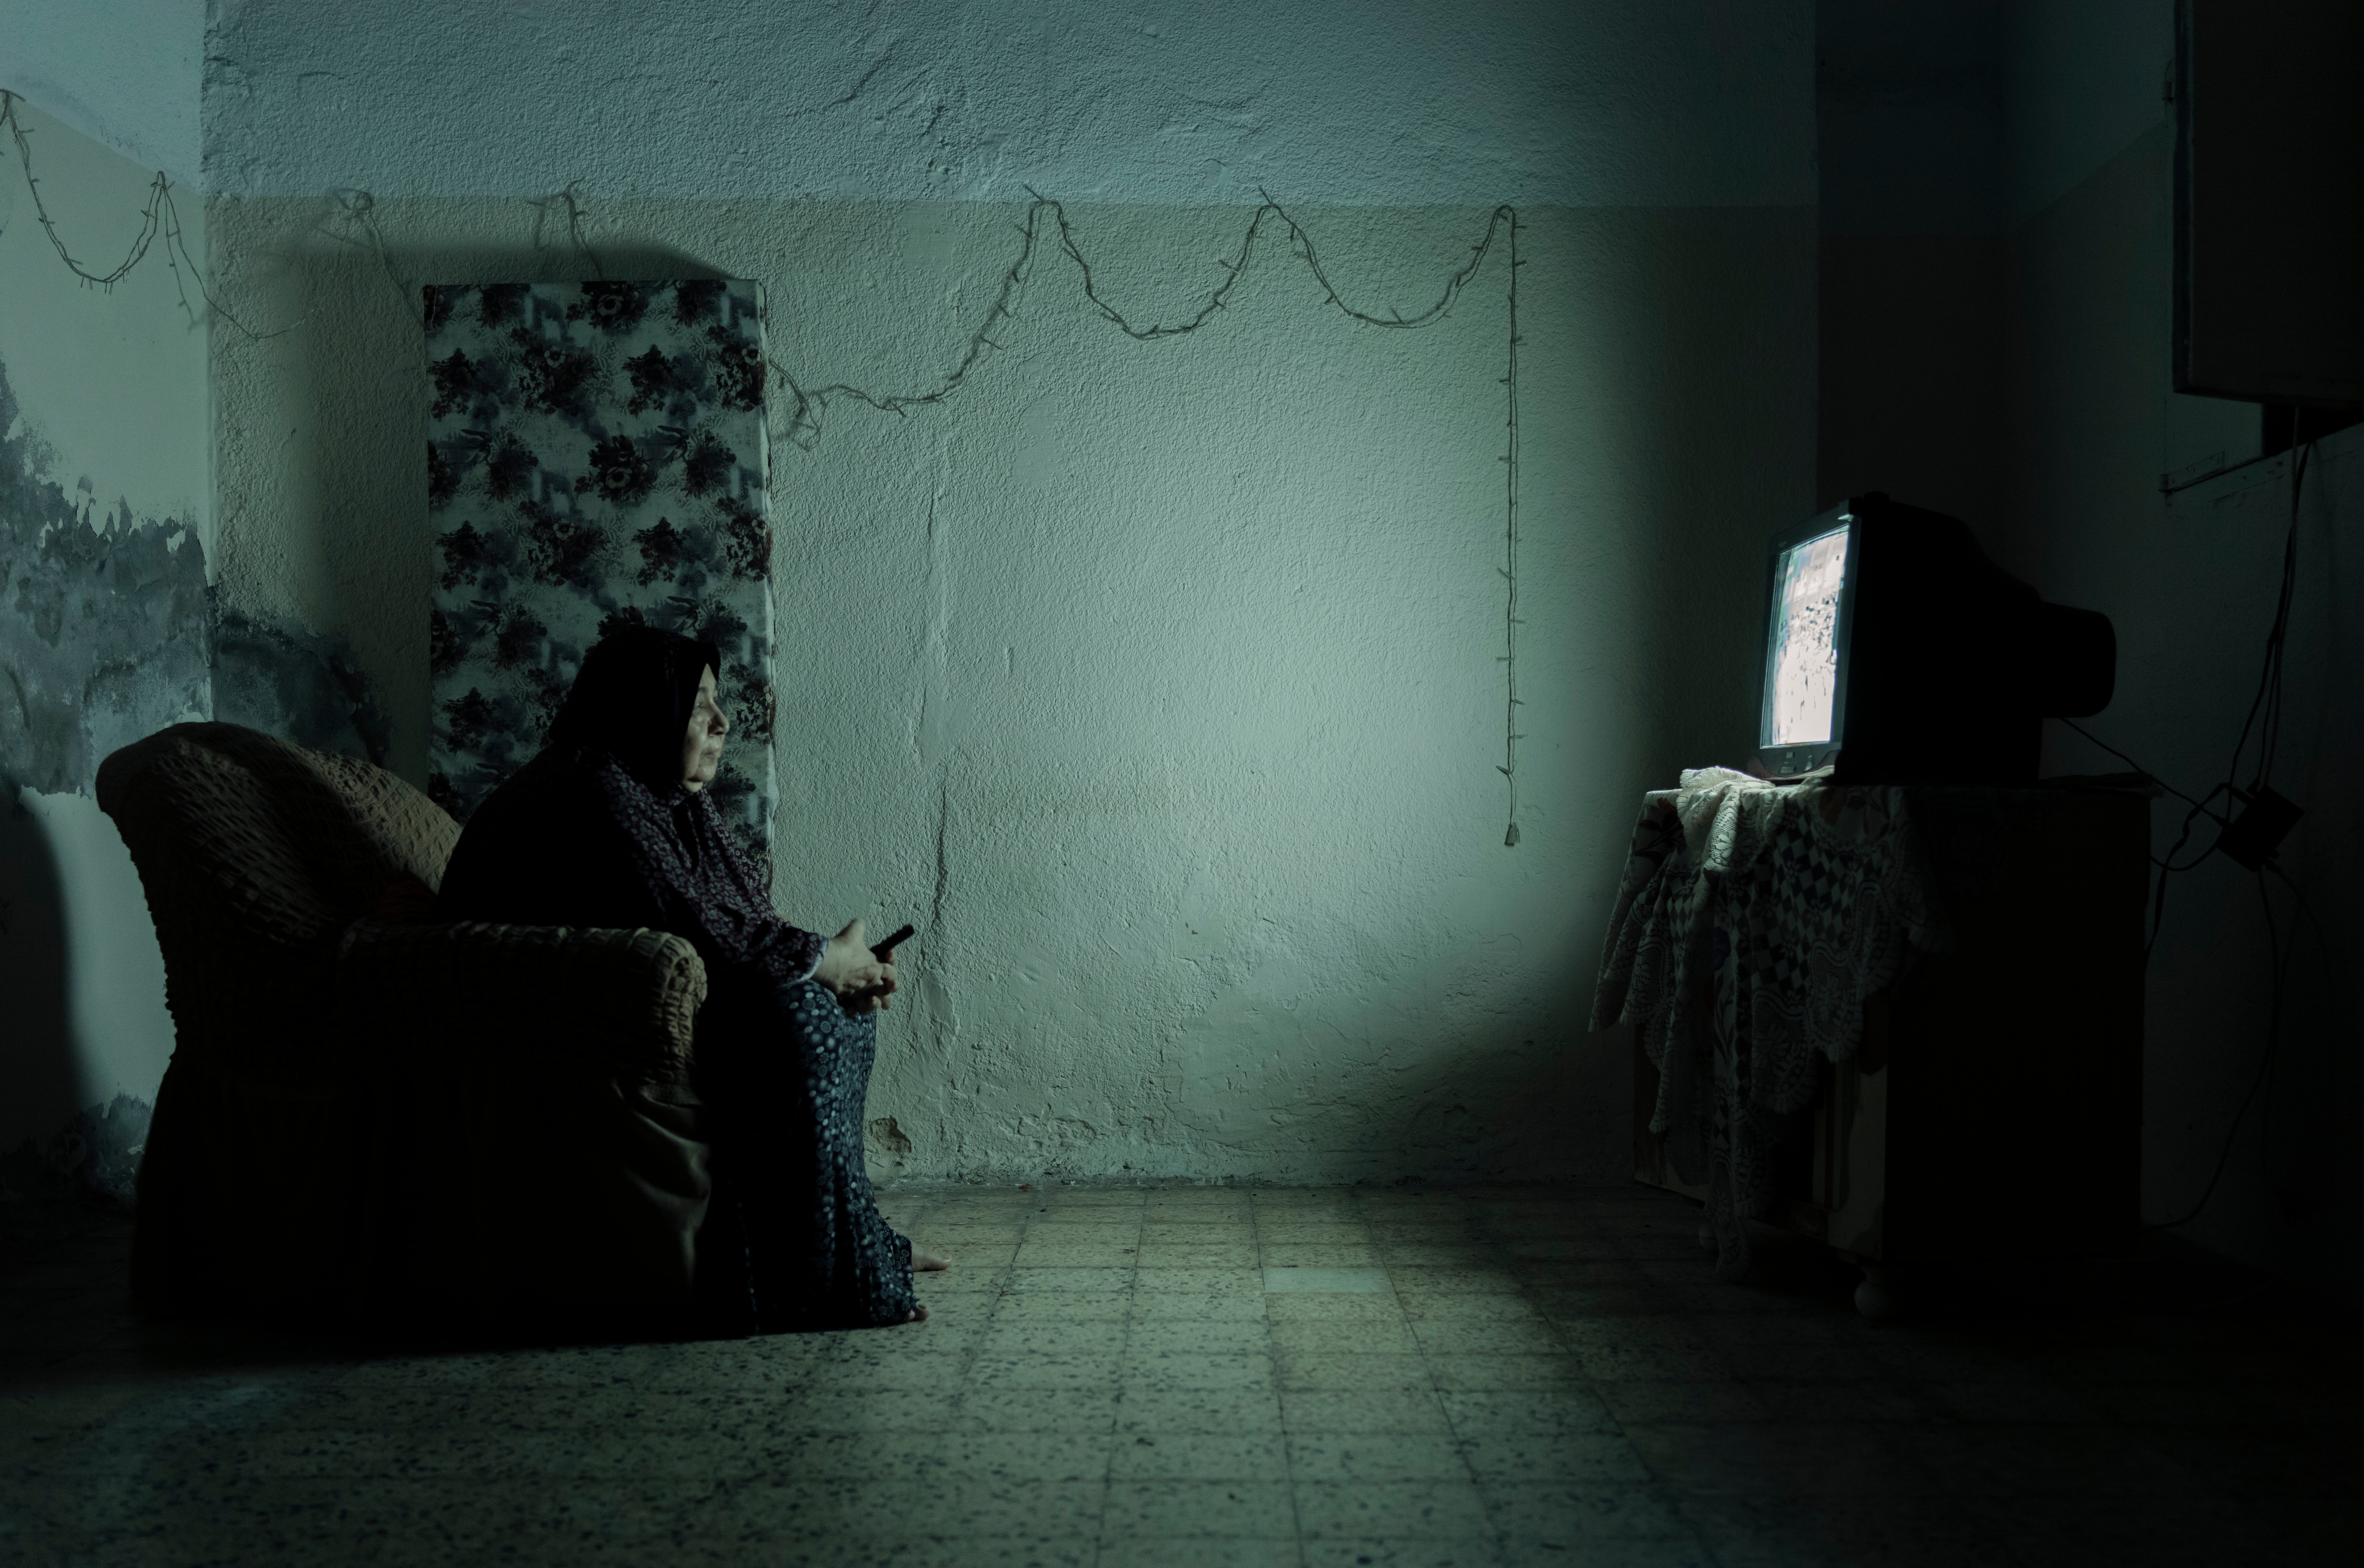 Sobhia lives among the alleyways of Al-Shati refugee camp in a ground-floor flat. ‘In my senior years with decreased mobility, the TV has become my best friend, it’s all I have to look forward to’